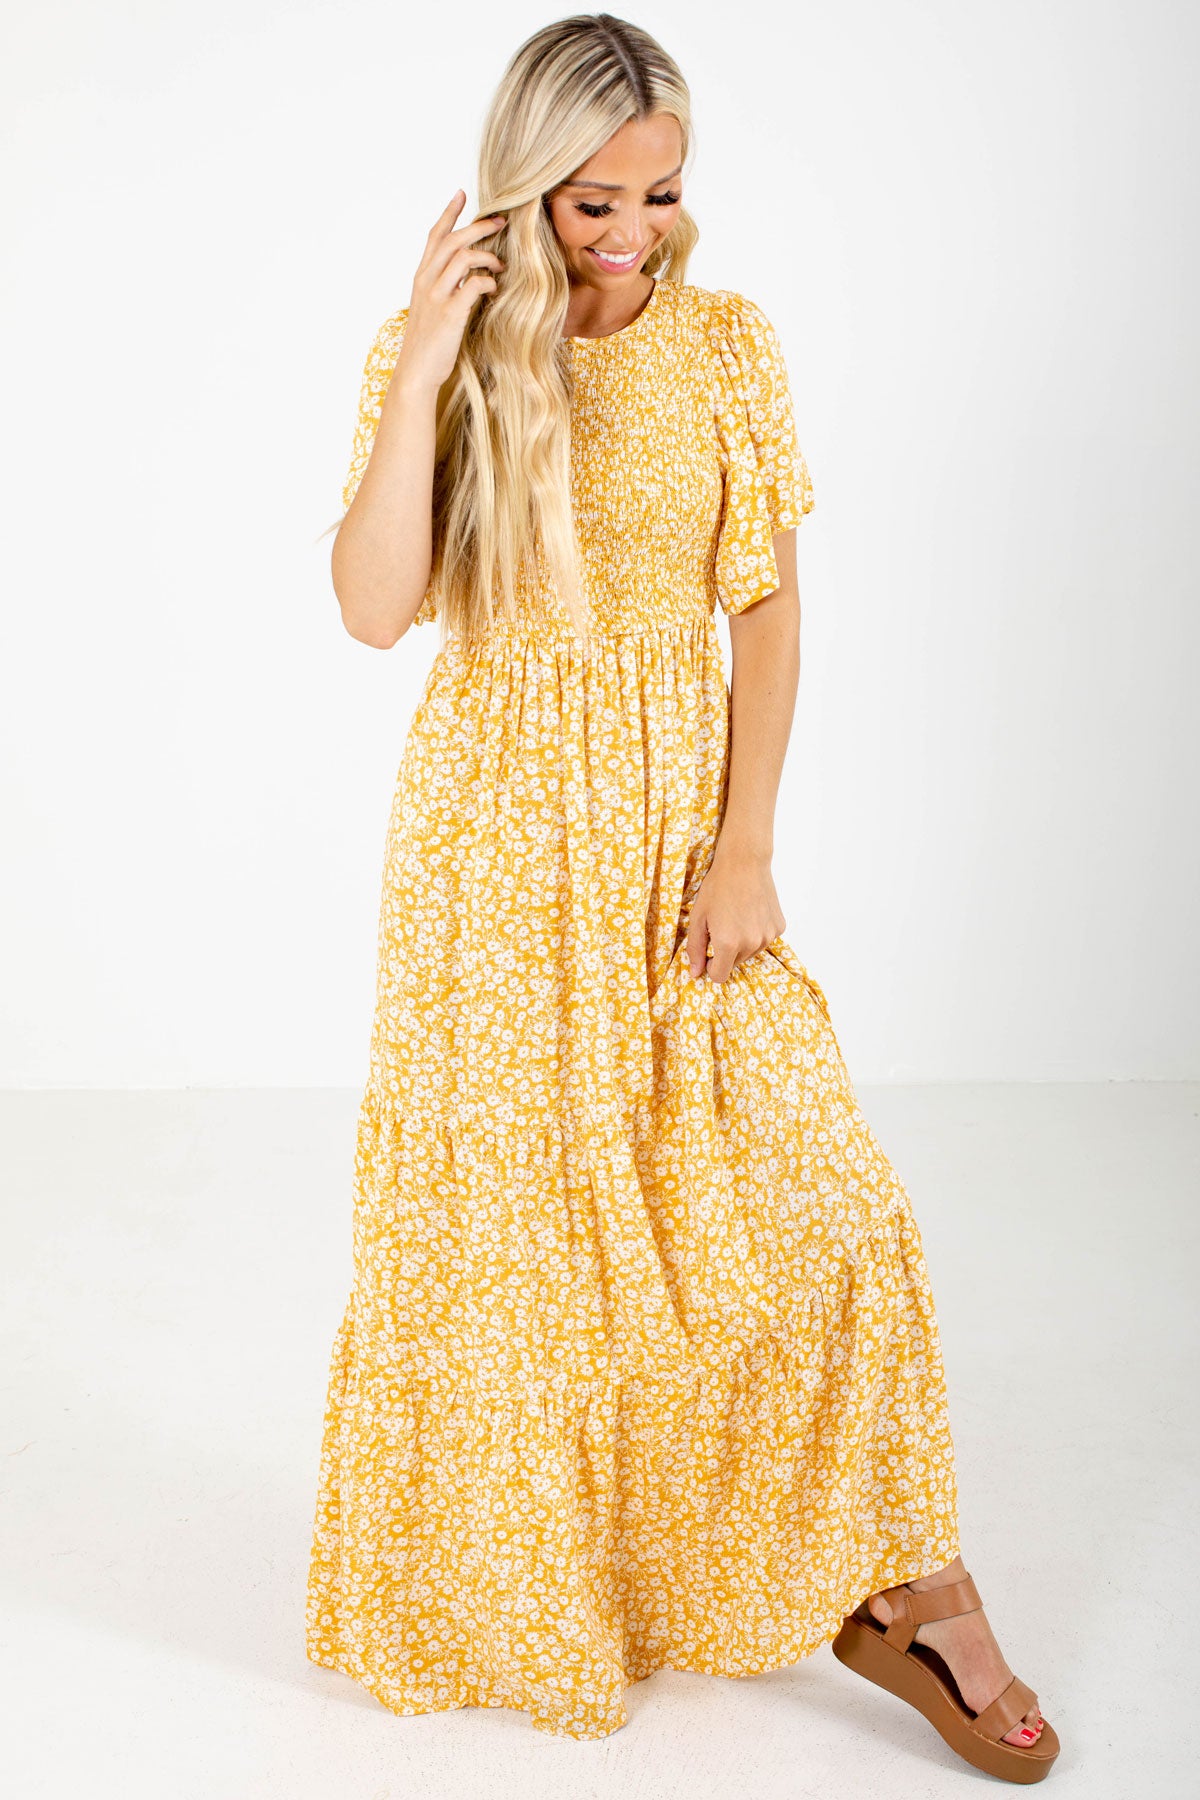 Yellow and White Floral Patterned Boutique Maxi Dresses for Women